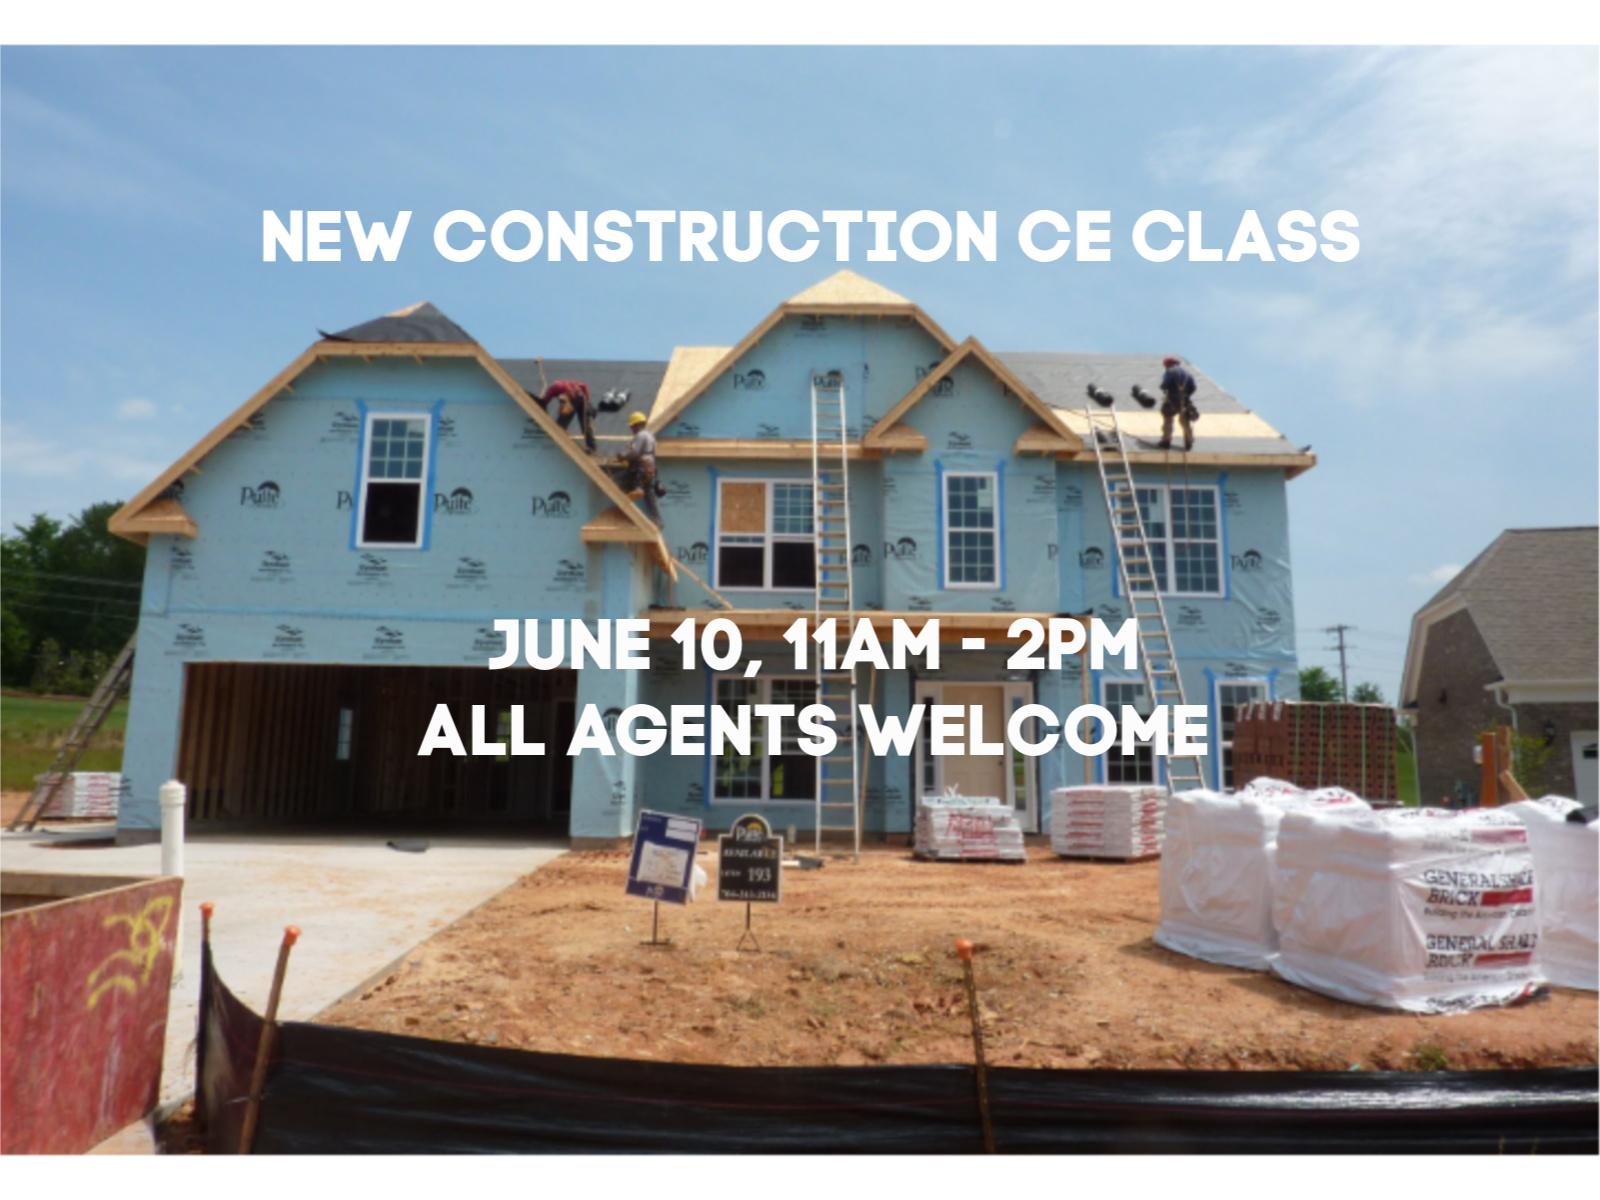 New Construction: What To Expect - Free 3 Hour CE Class